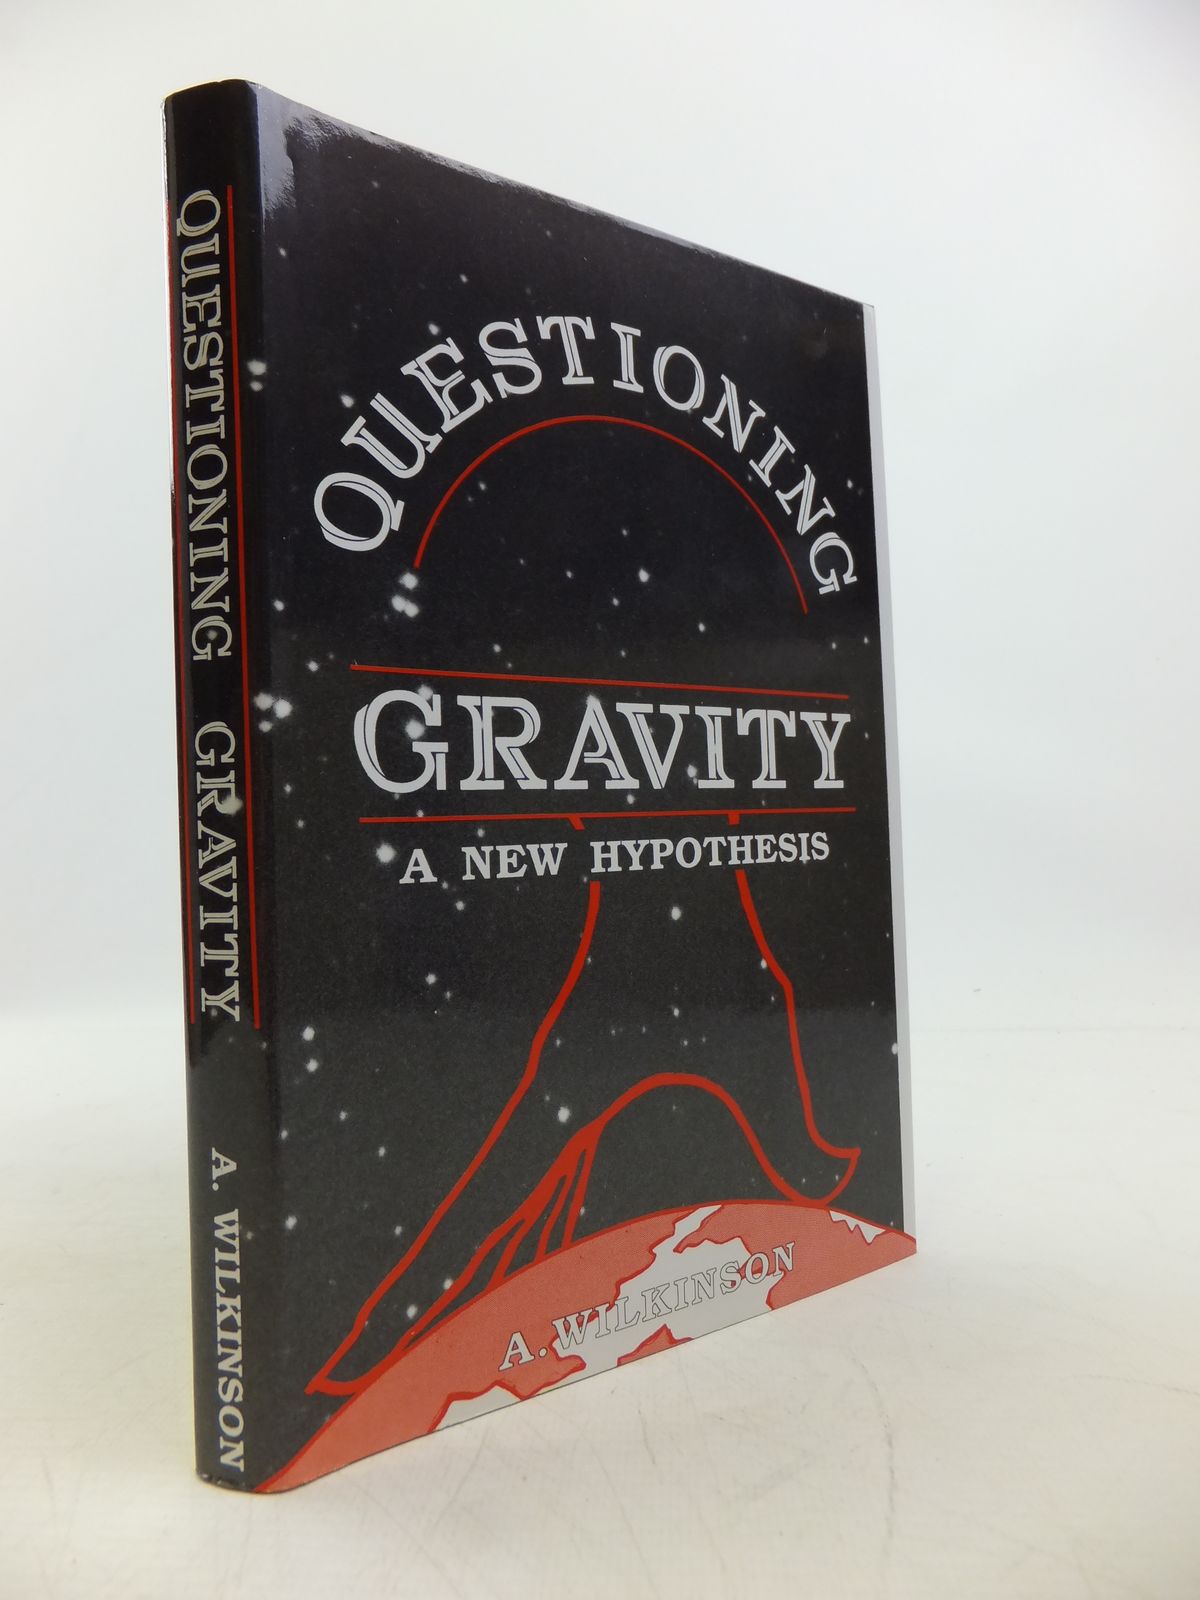 Photo of QUESTIONING GRAVITY written by Wilkinson, A. published by Self Publishing Association Ltd. (STOCK CODE: 1208138)  for sale by Stella & Rose's Books